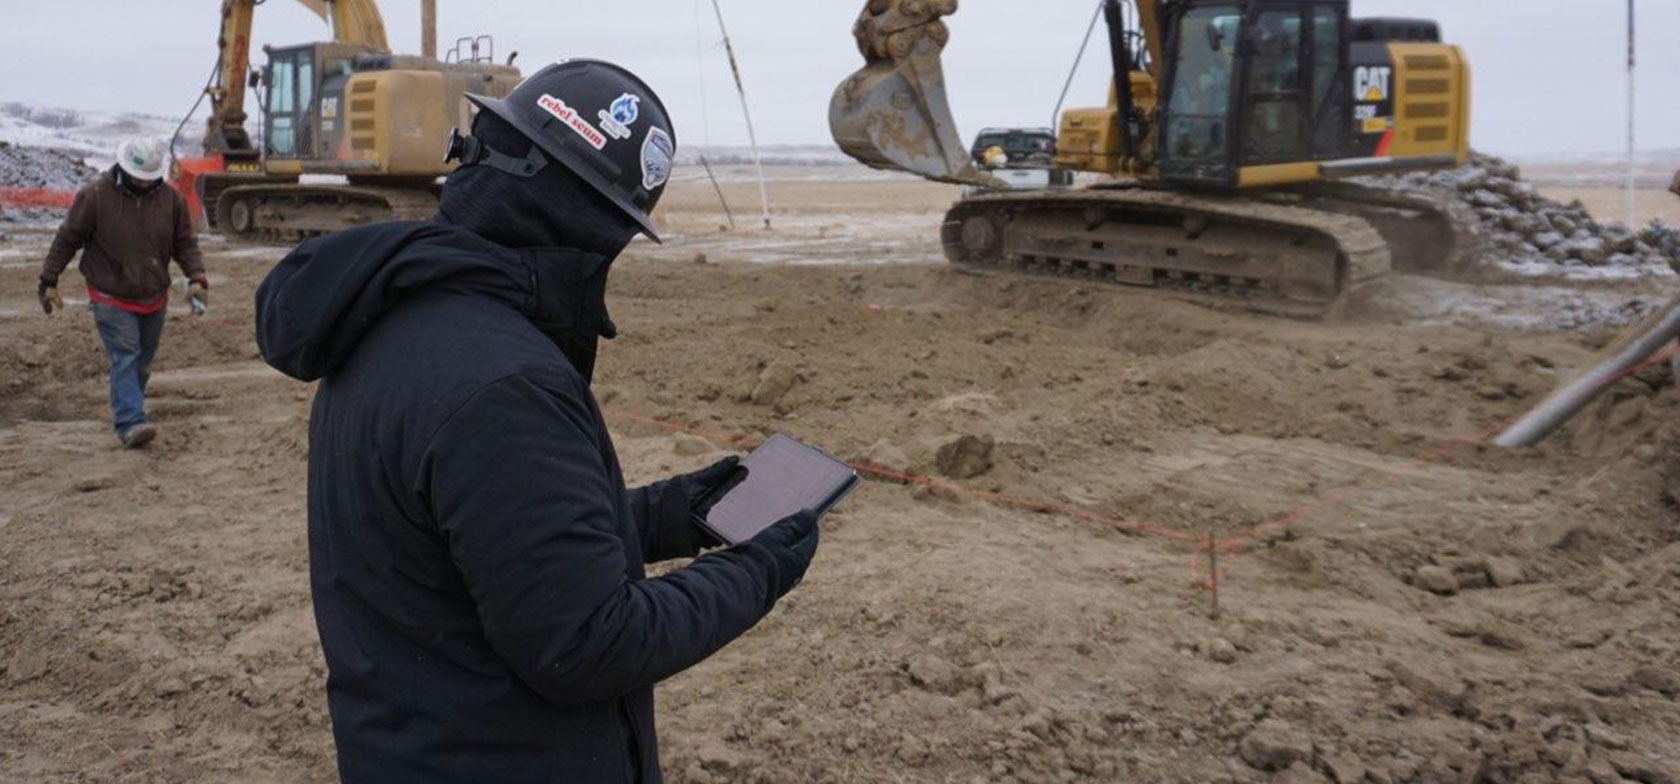 North American Pipeline Inspections uses GoFormz mobile forms in their inspections